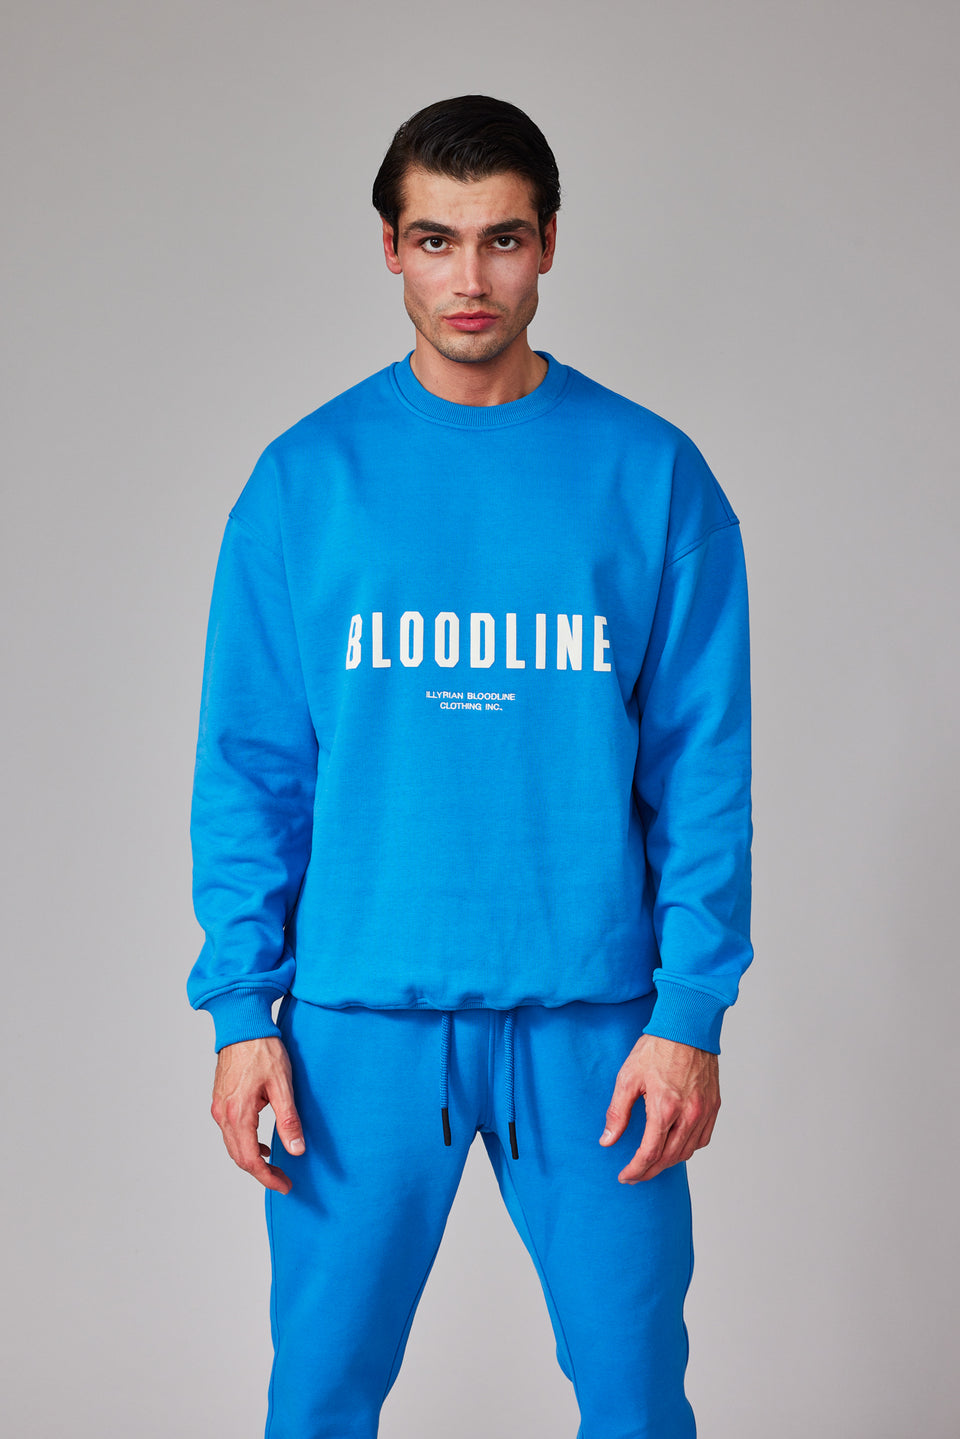 The Bloodline Sweater - Blue